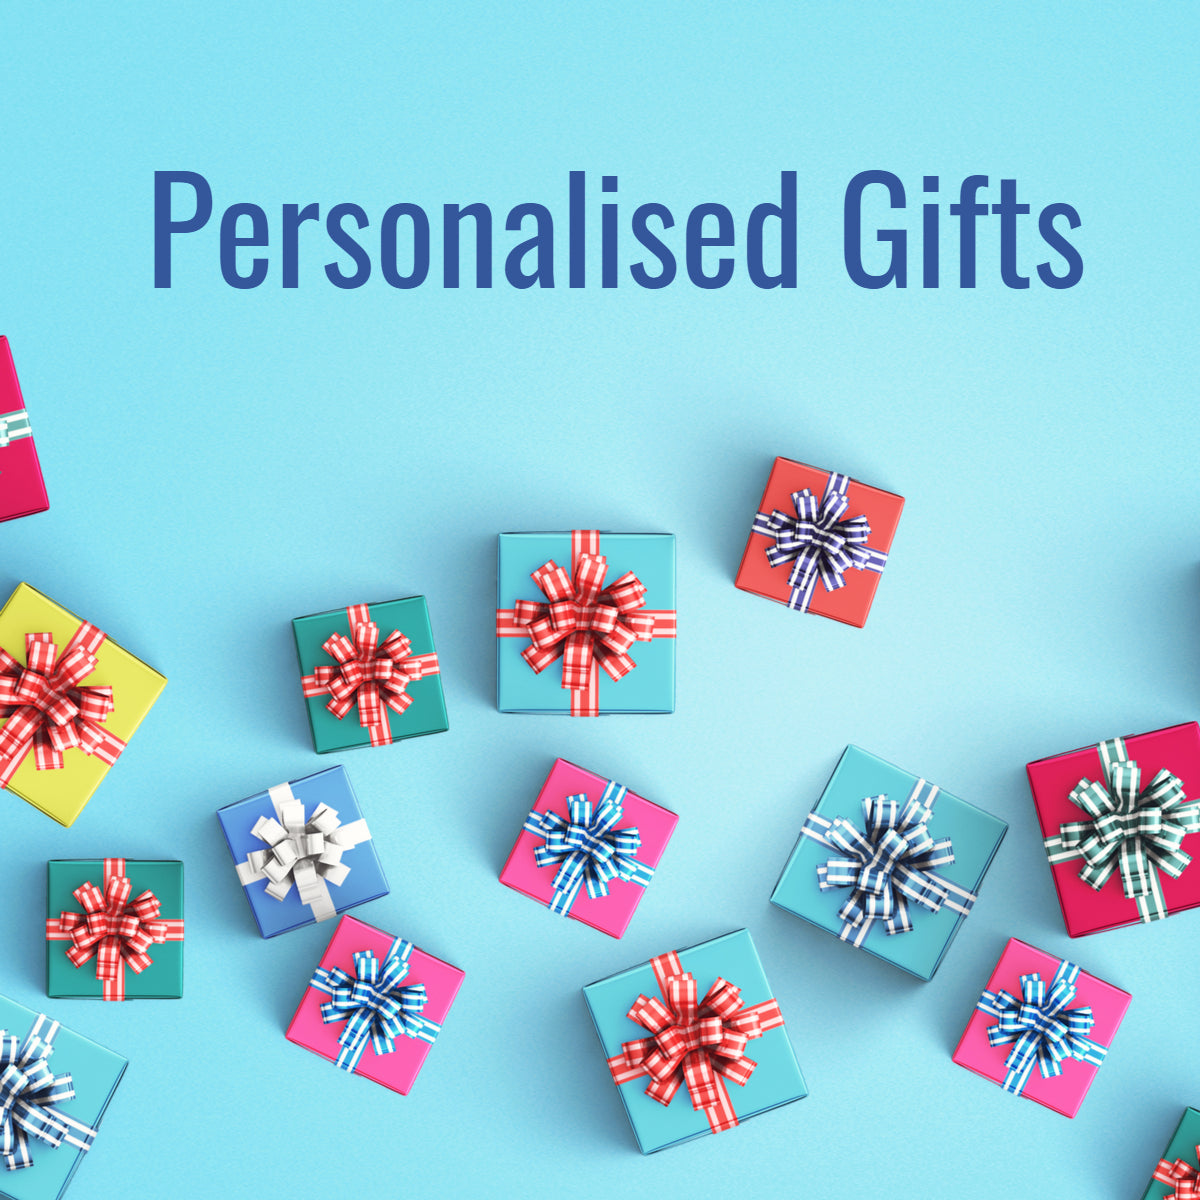 Personalised Gifts